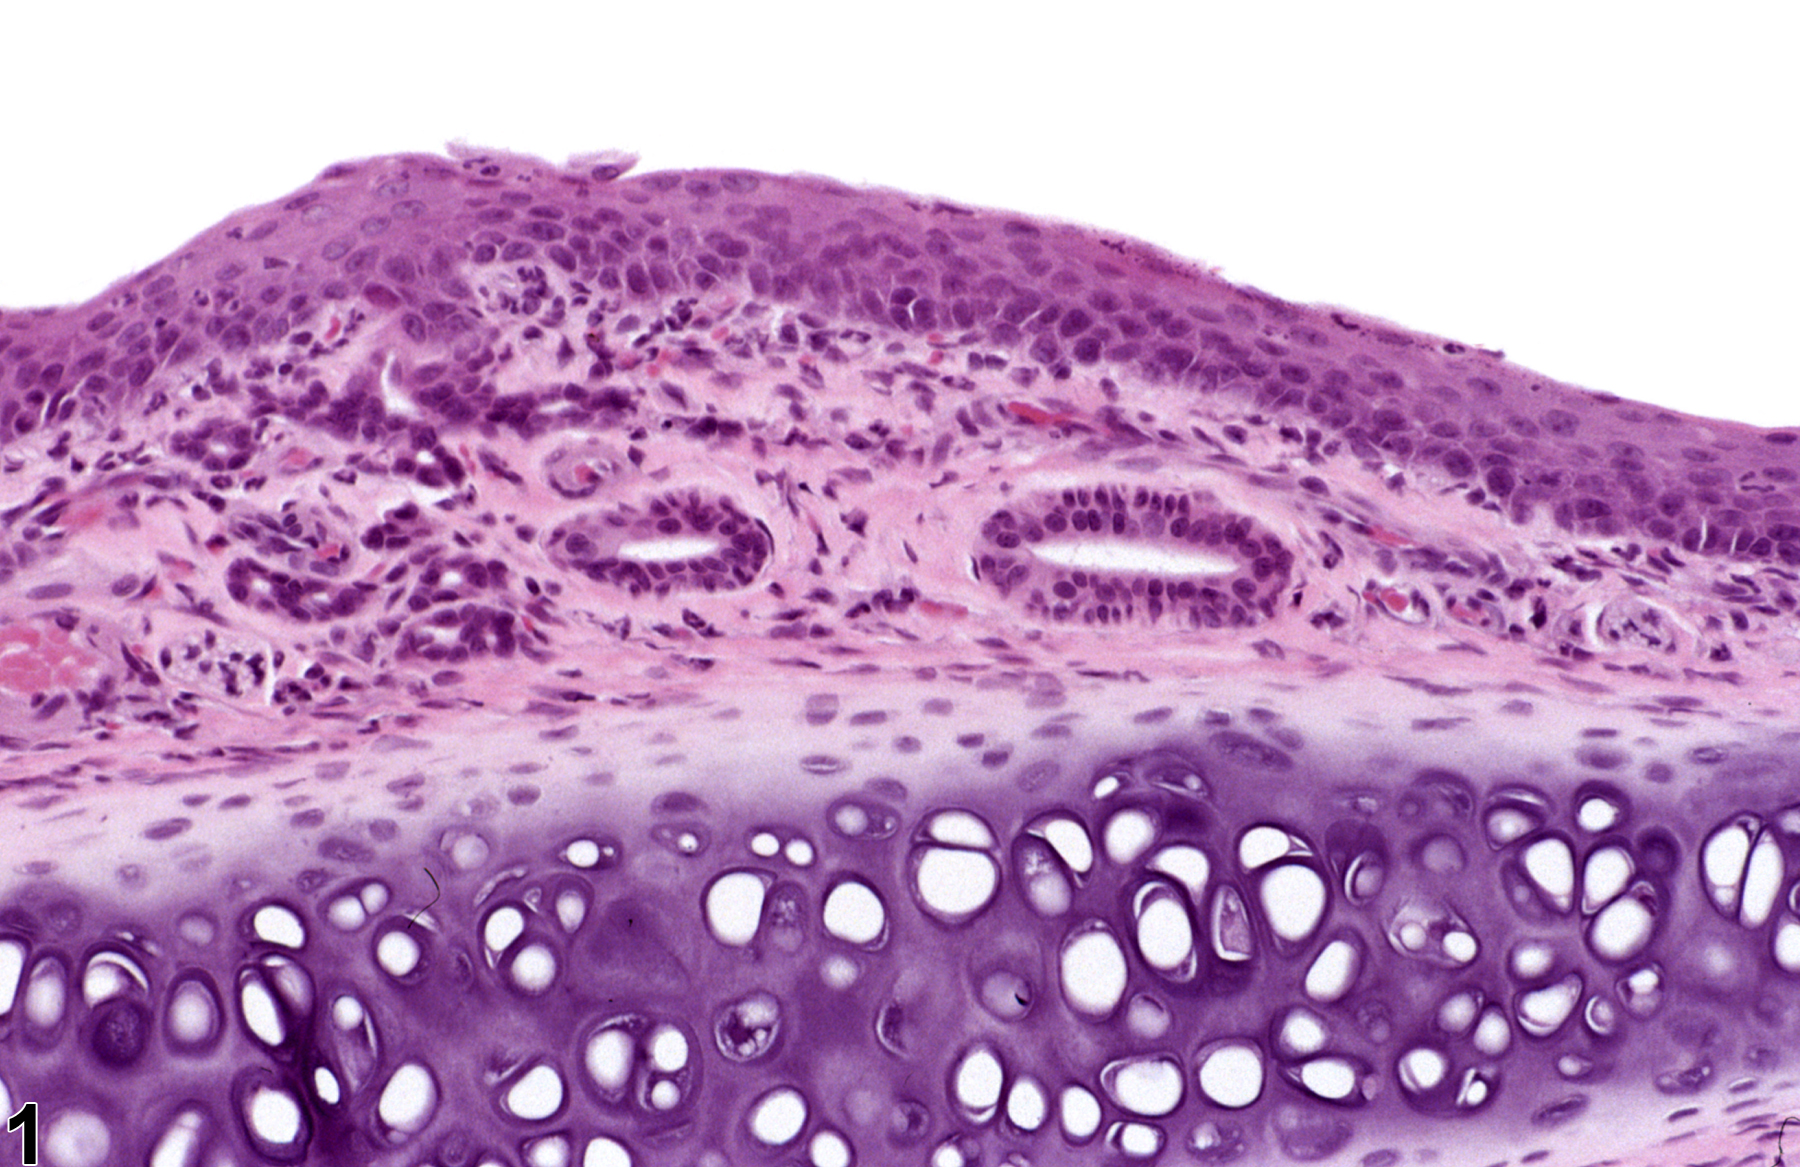 Image of metaplasia, squamous in the nose, respiratory epithelium from a male F344/N rat in a chronic study